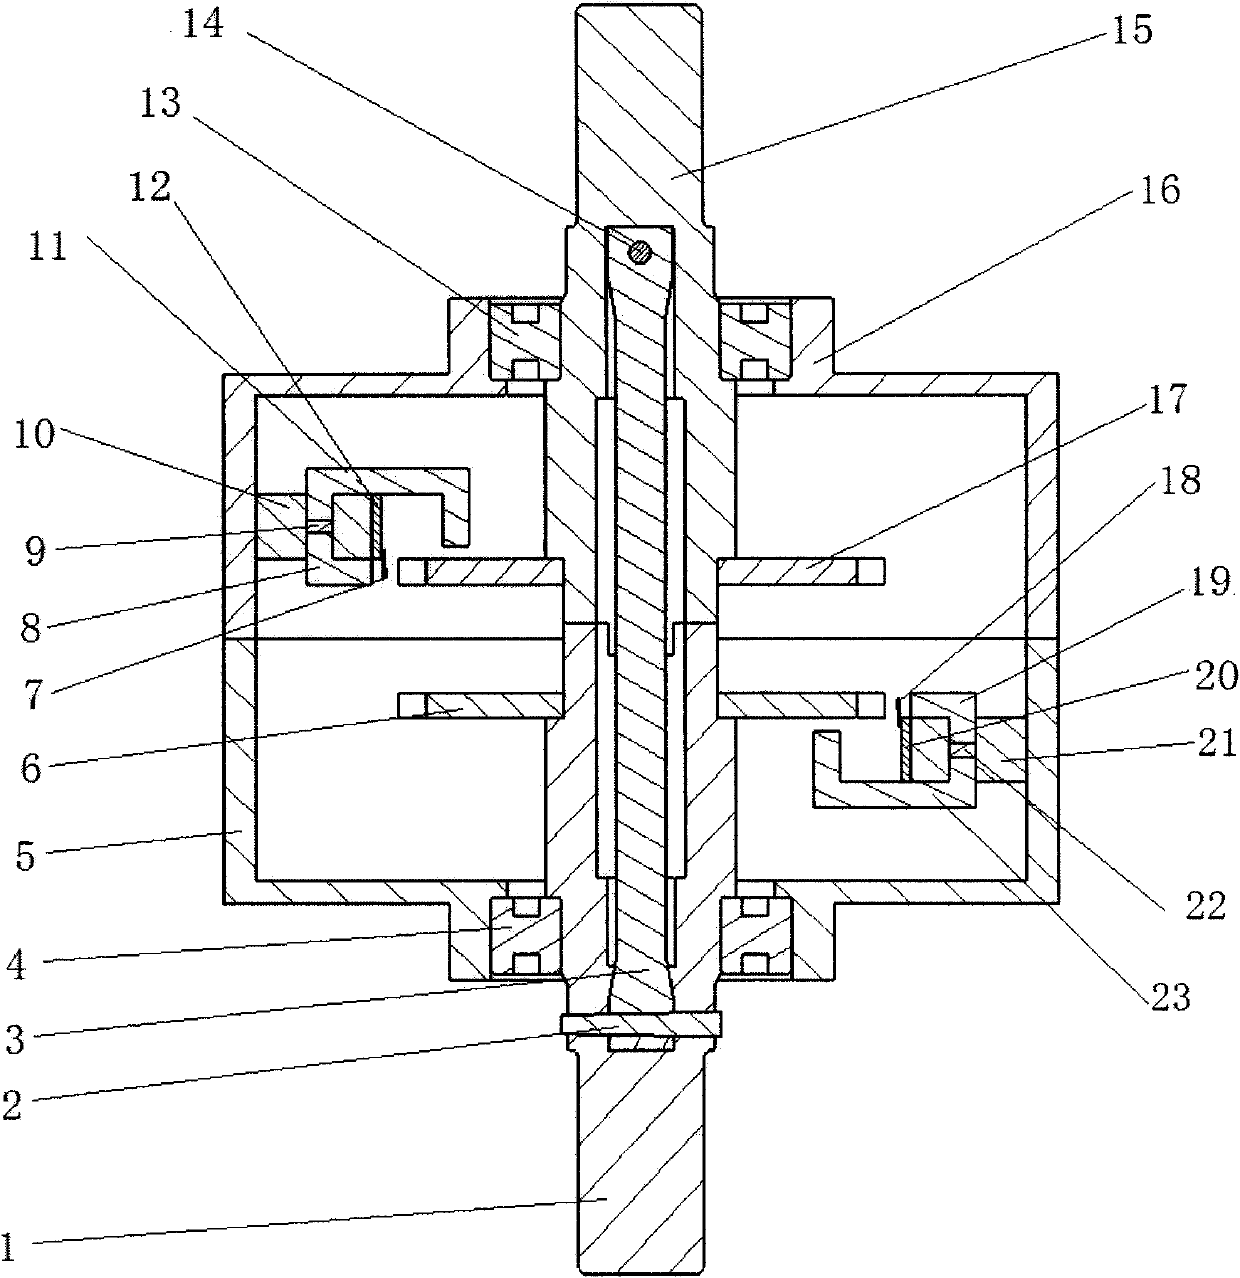 Non-contact phase-difference type torque sensor